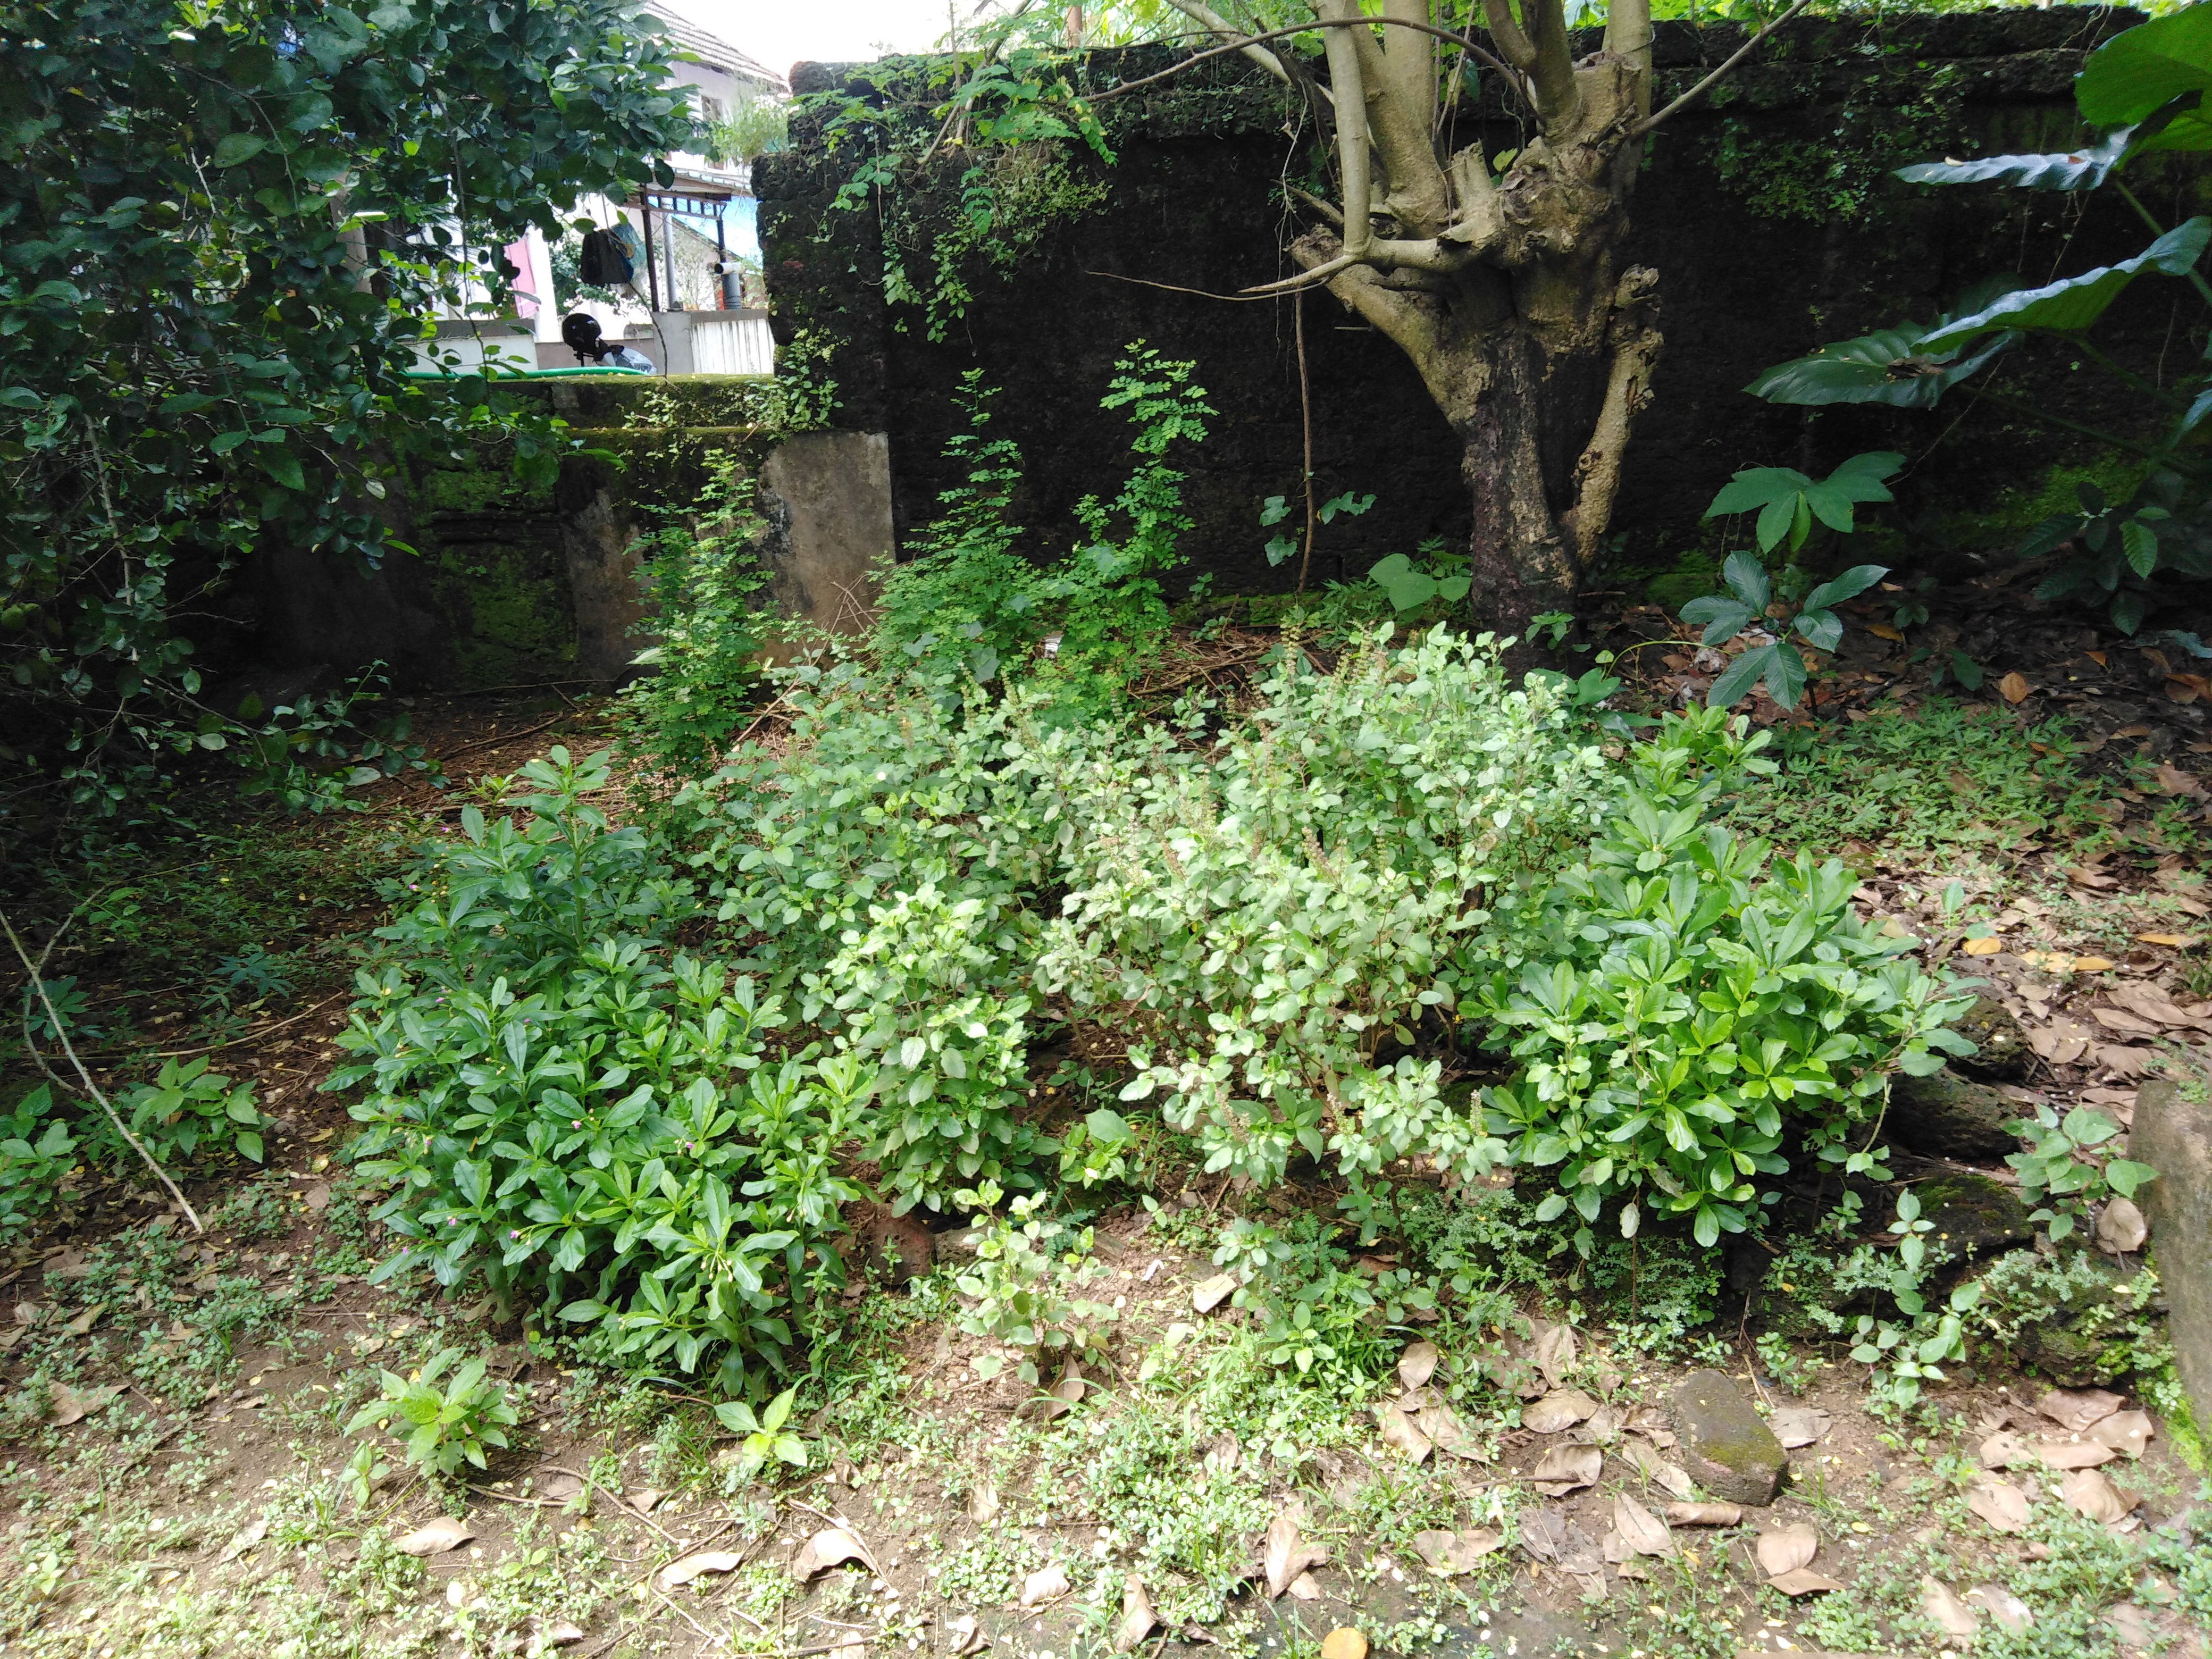 The yard behind the kitchen. Ceylon Spinach, a drumstick tree, a suran plant, and the neighbour's lemon tree can be seen